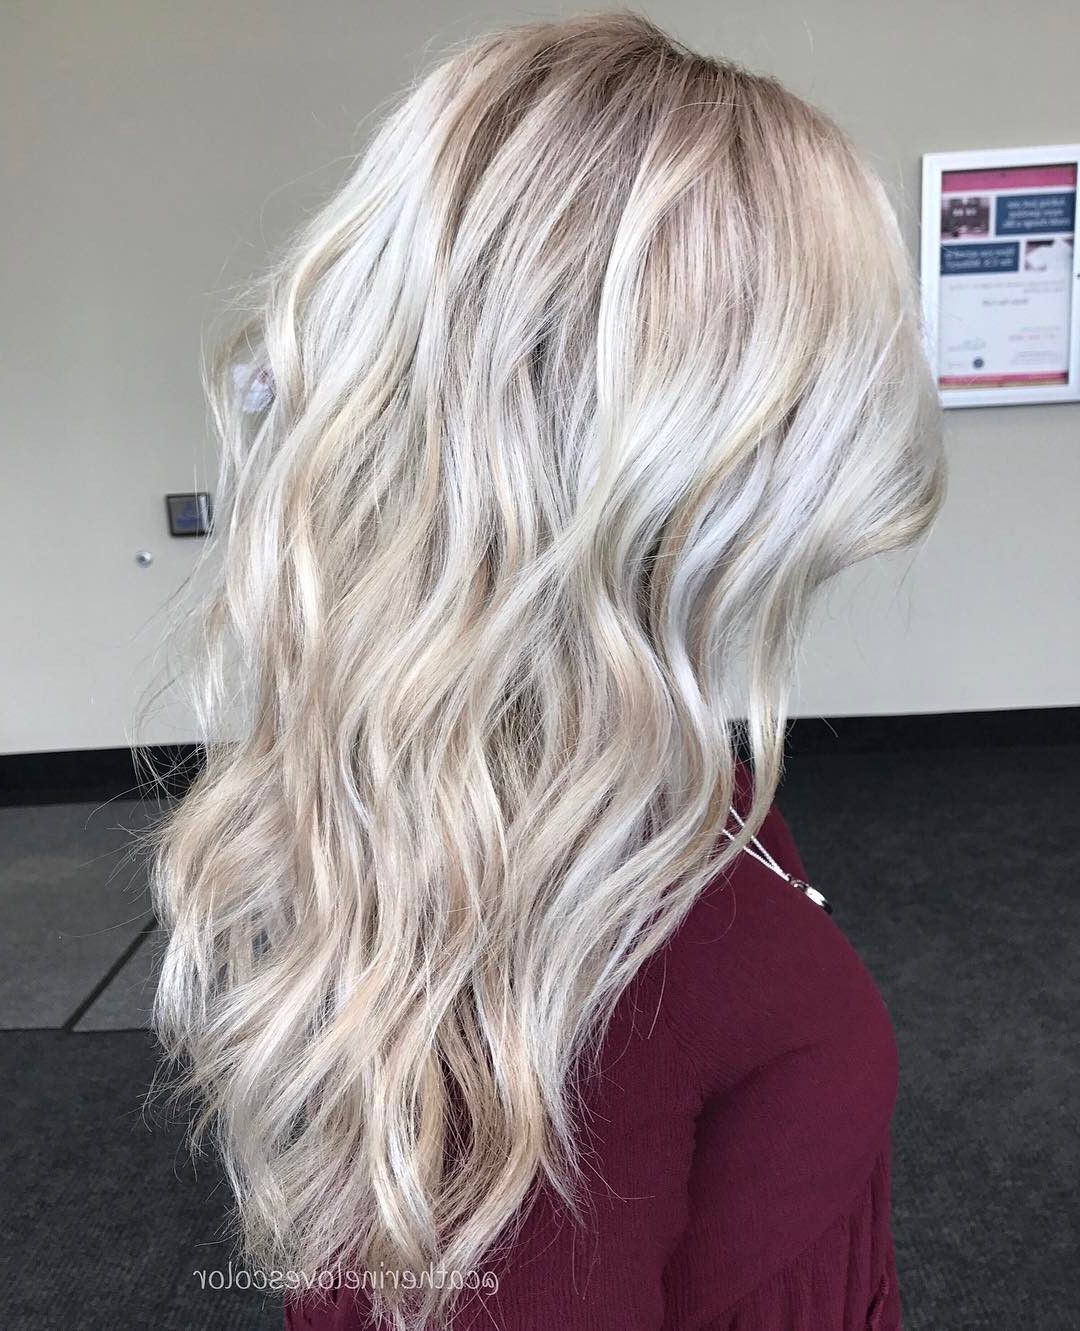 20 Adorable Ash Blonde Hairstyles To Try: Hair Color Ideas 2019 Regarding Voluminous Two Tone Haircuts (View 14 of 20)